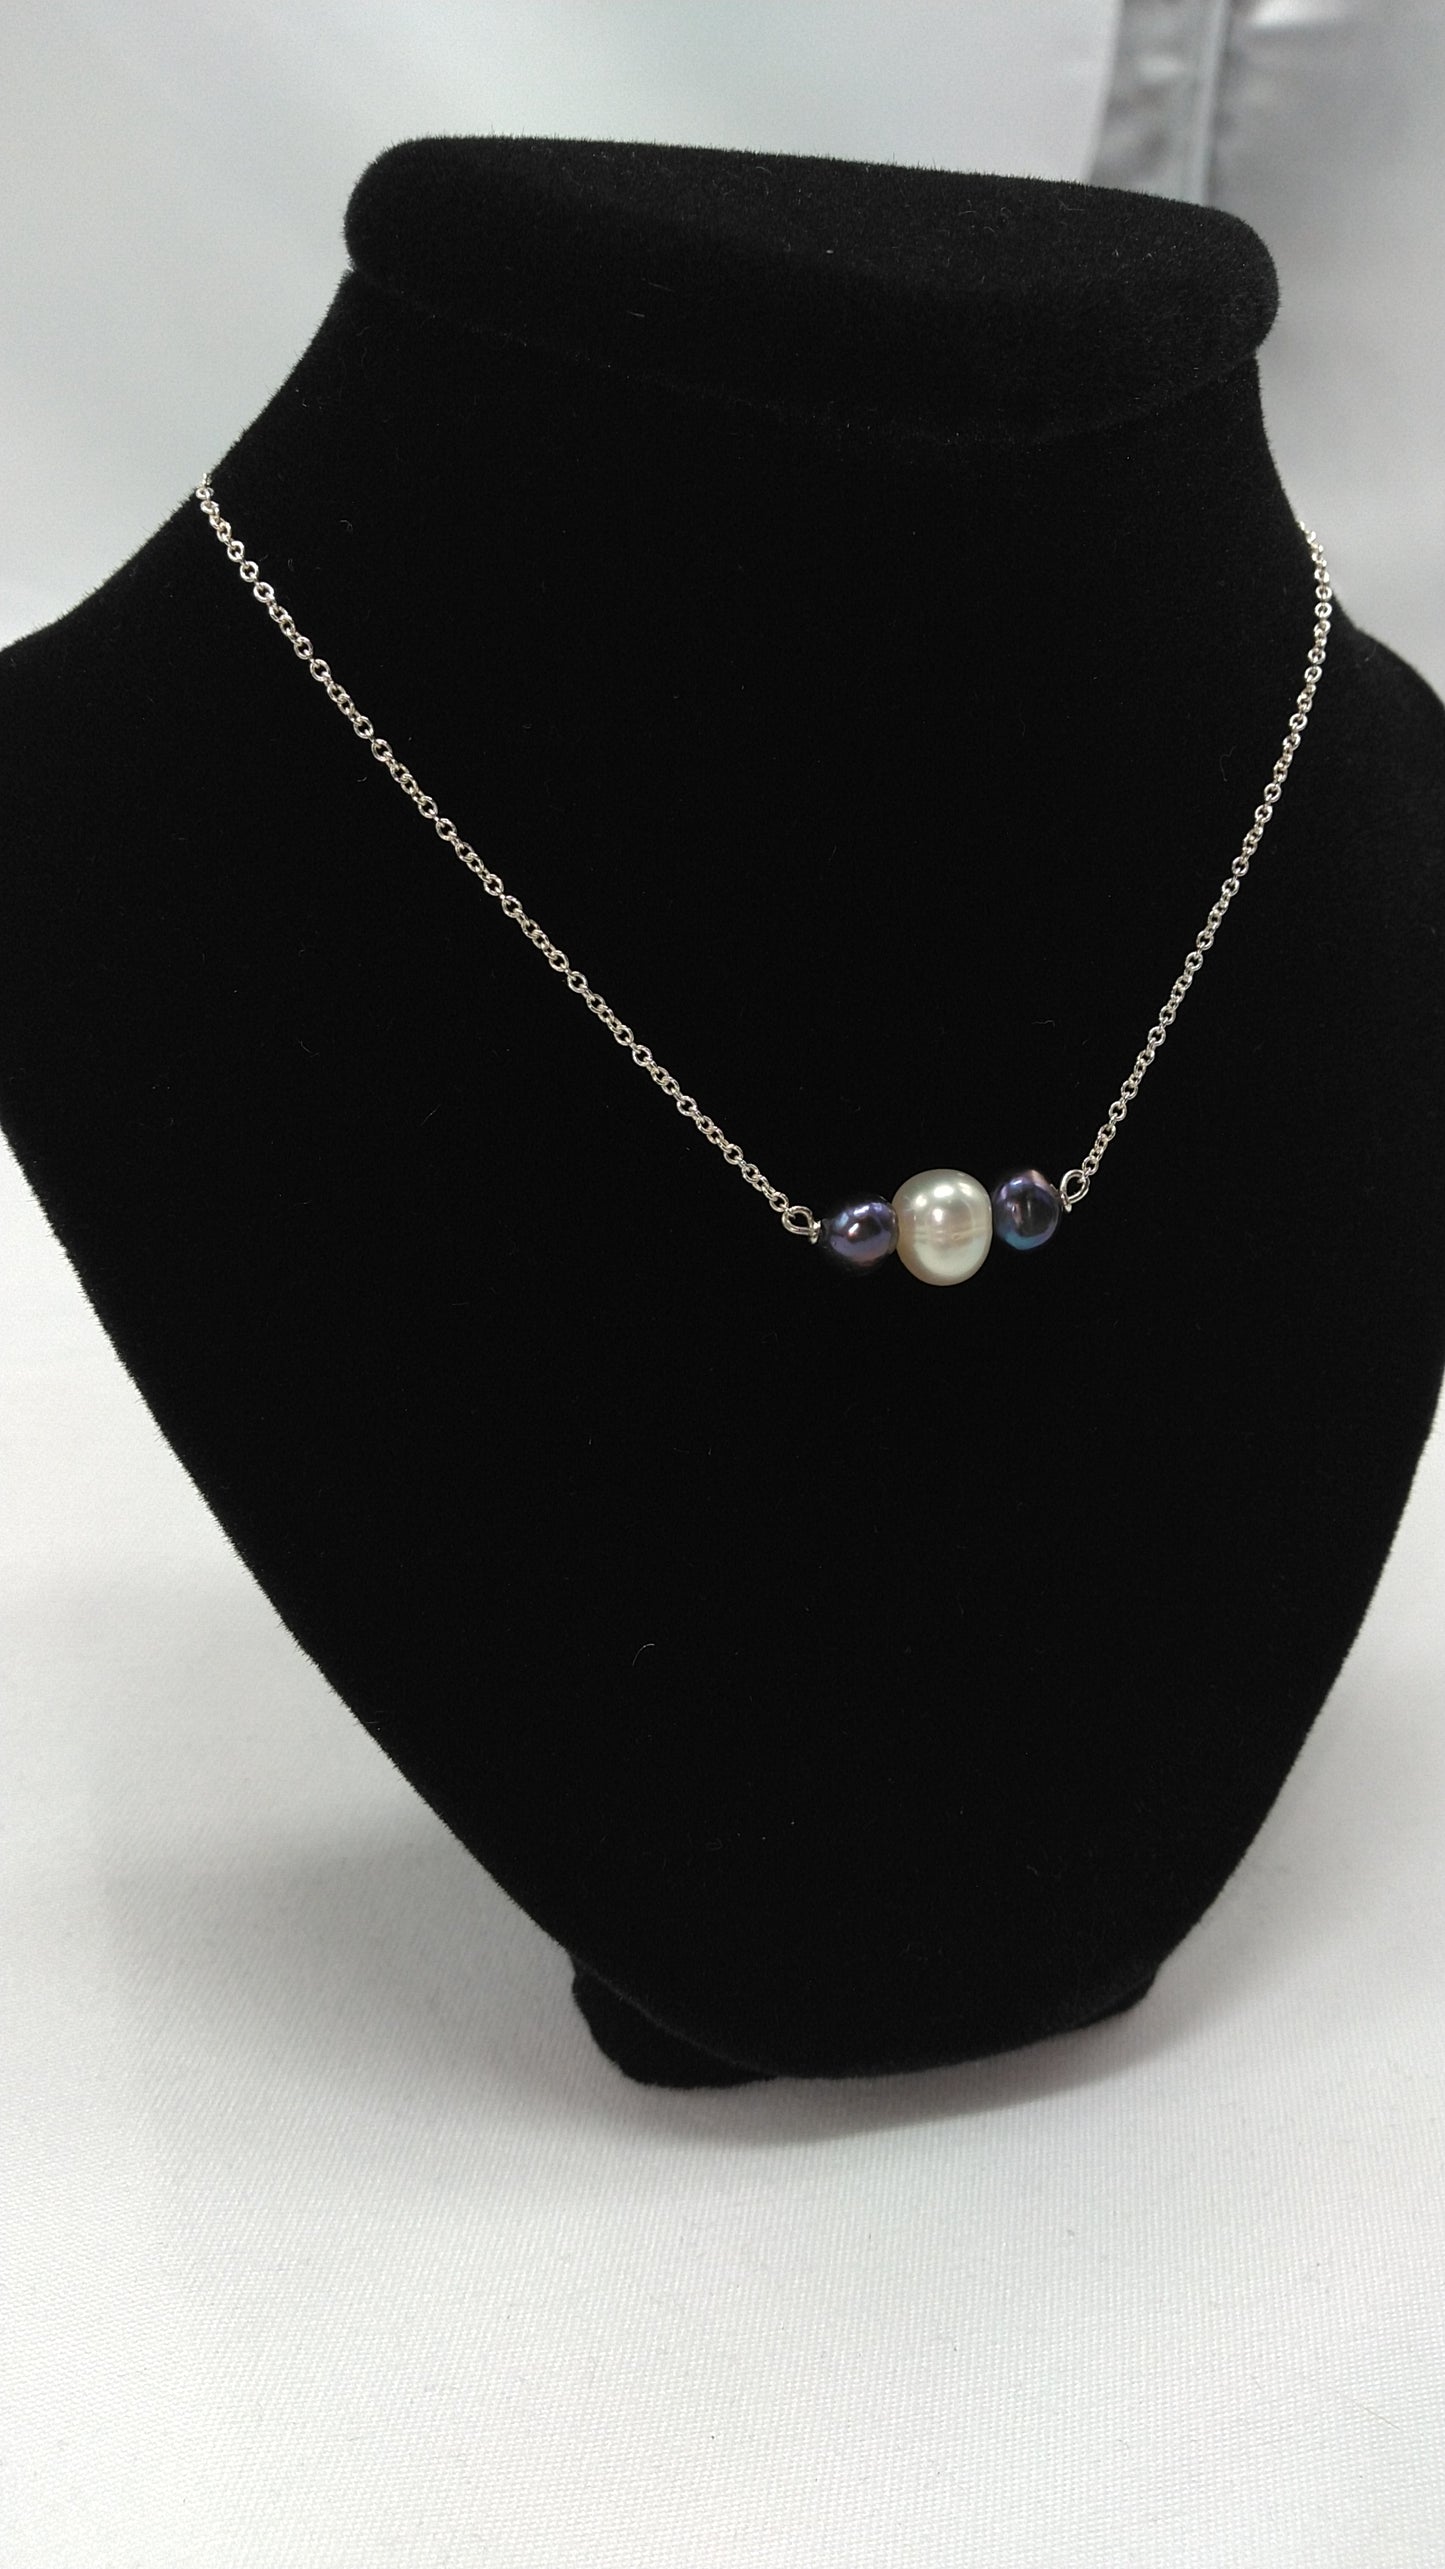 3 Pearl Silver Necklace: White and Peacock Pearls